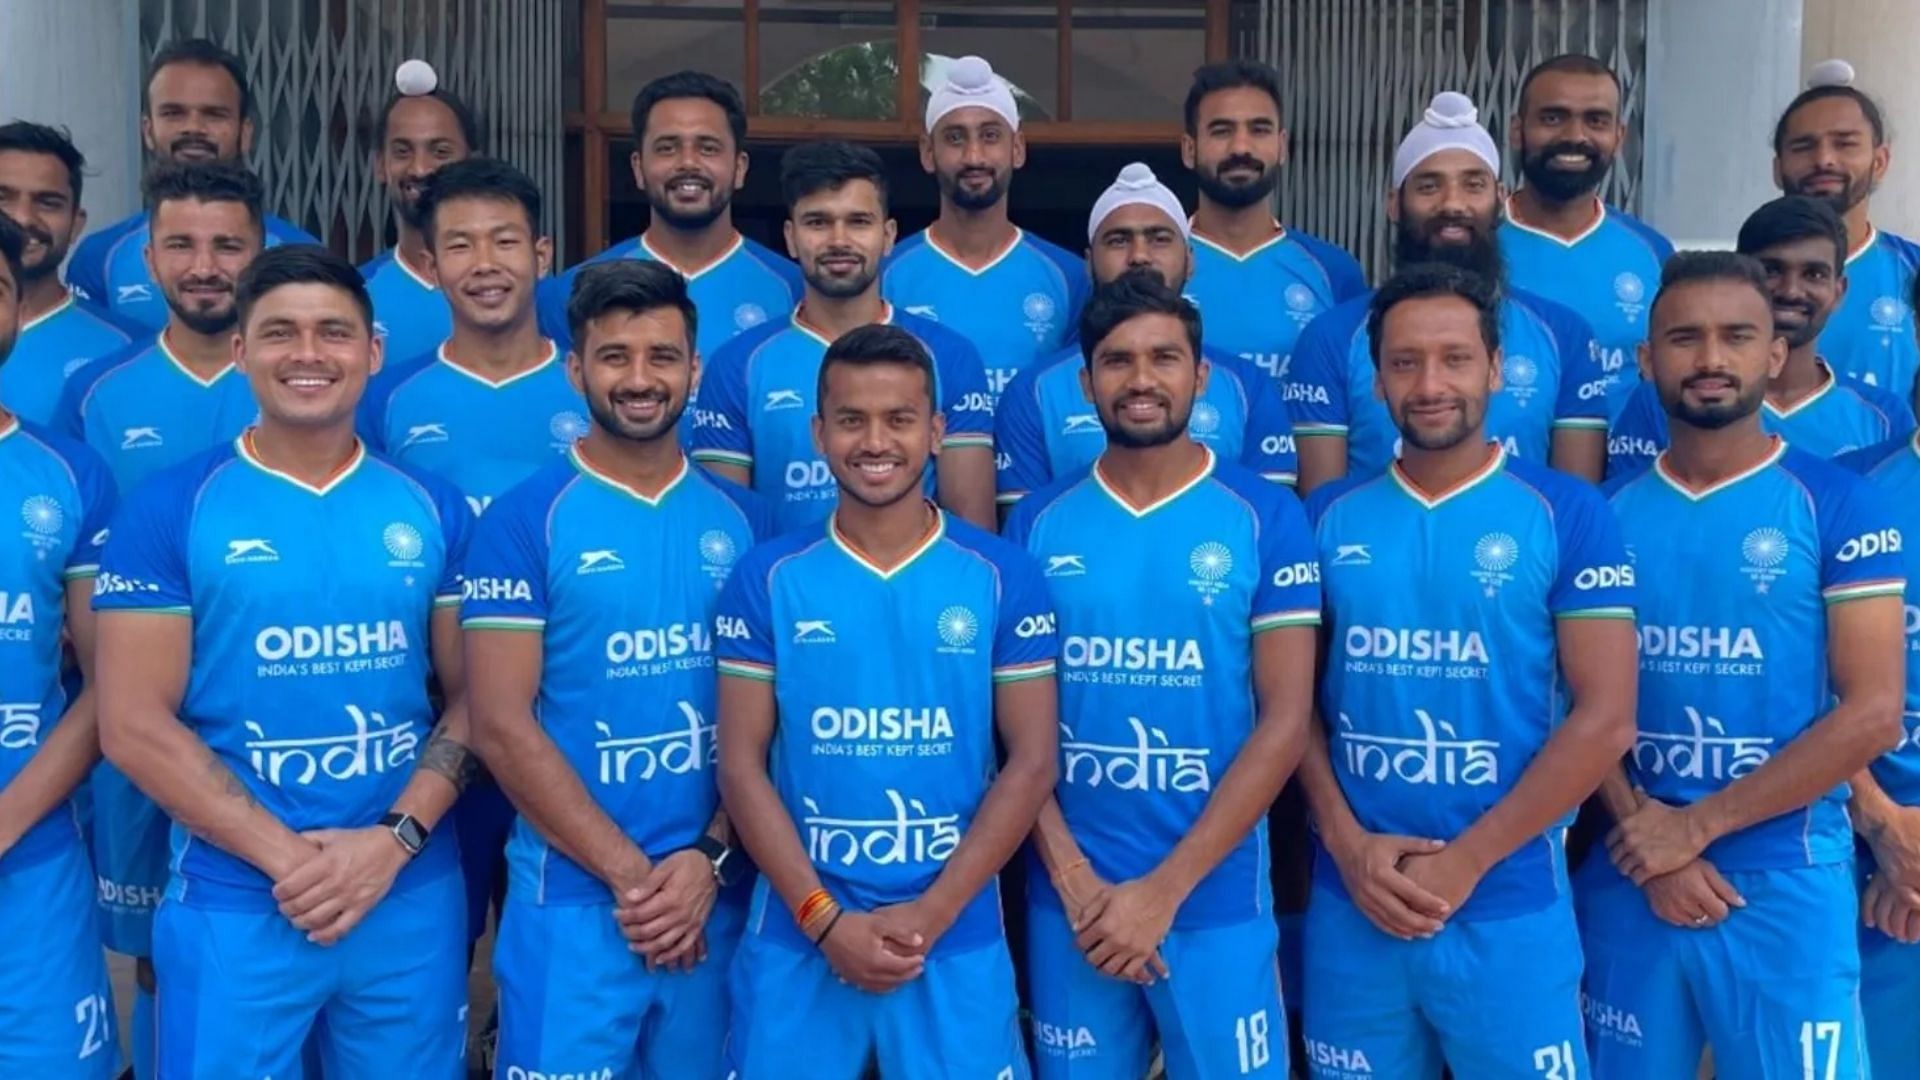 Odisha Government Extends Sponsorship Deal with Hockey India Until 2036 (Image via Hockey India)